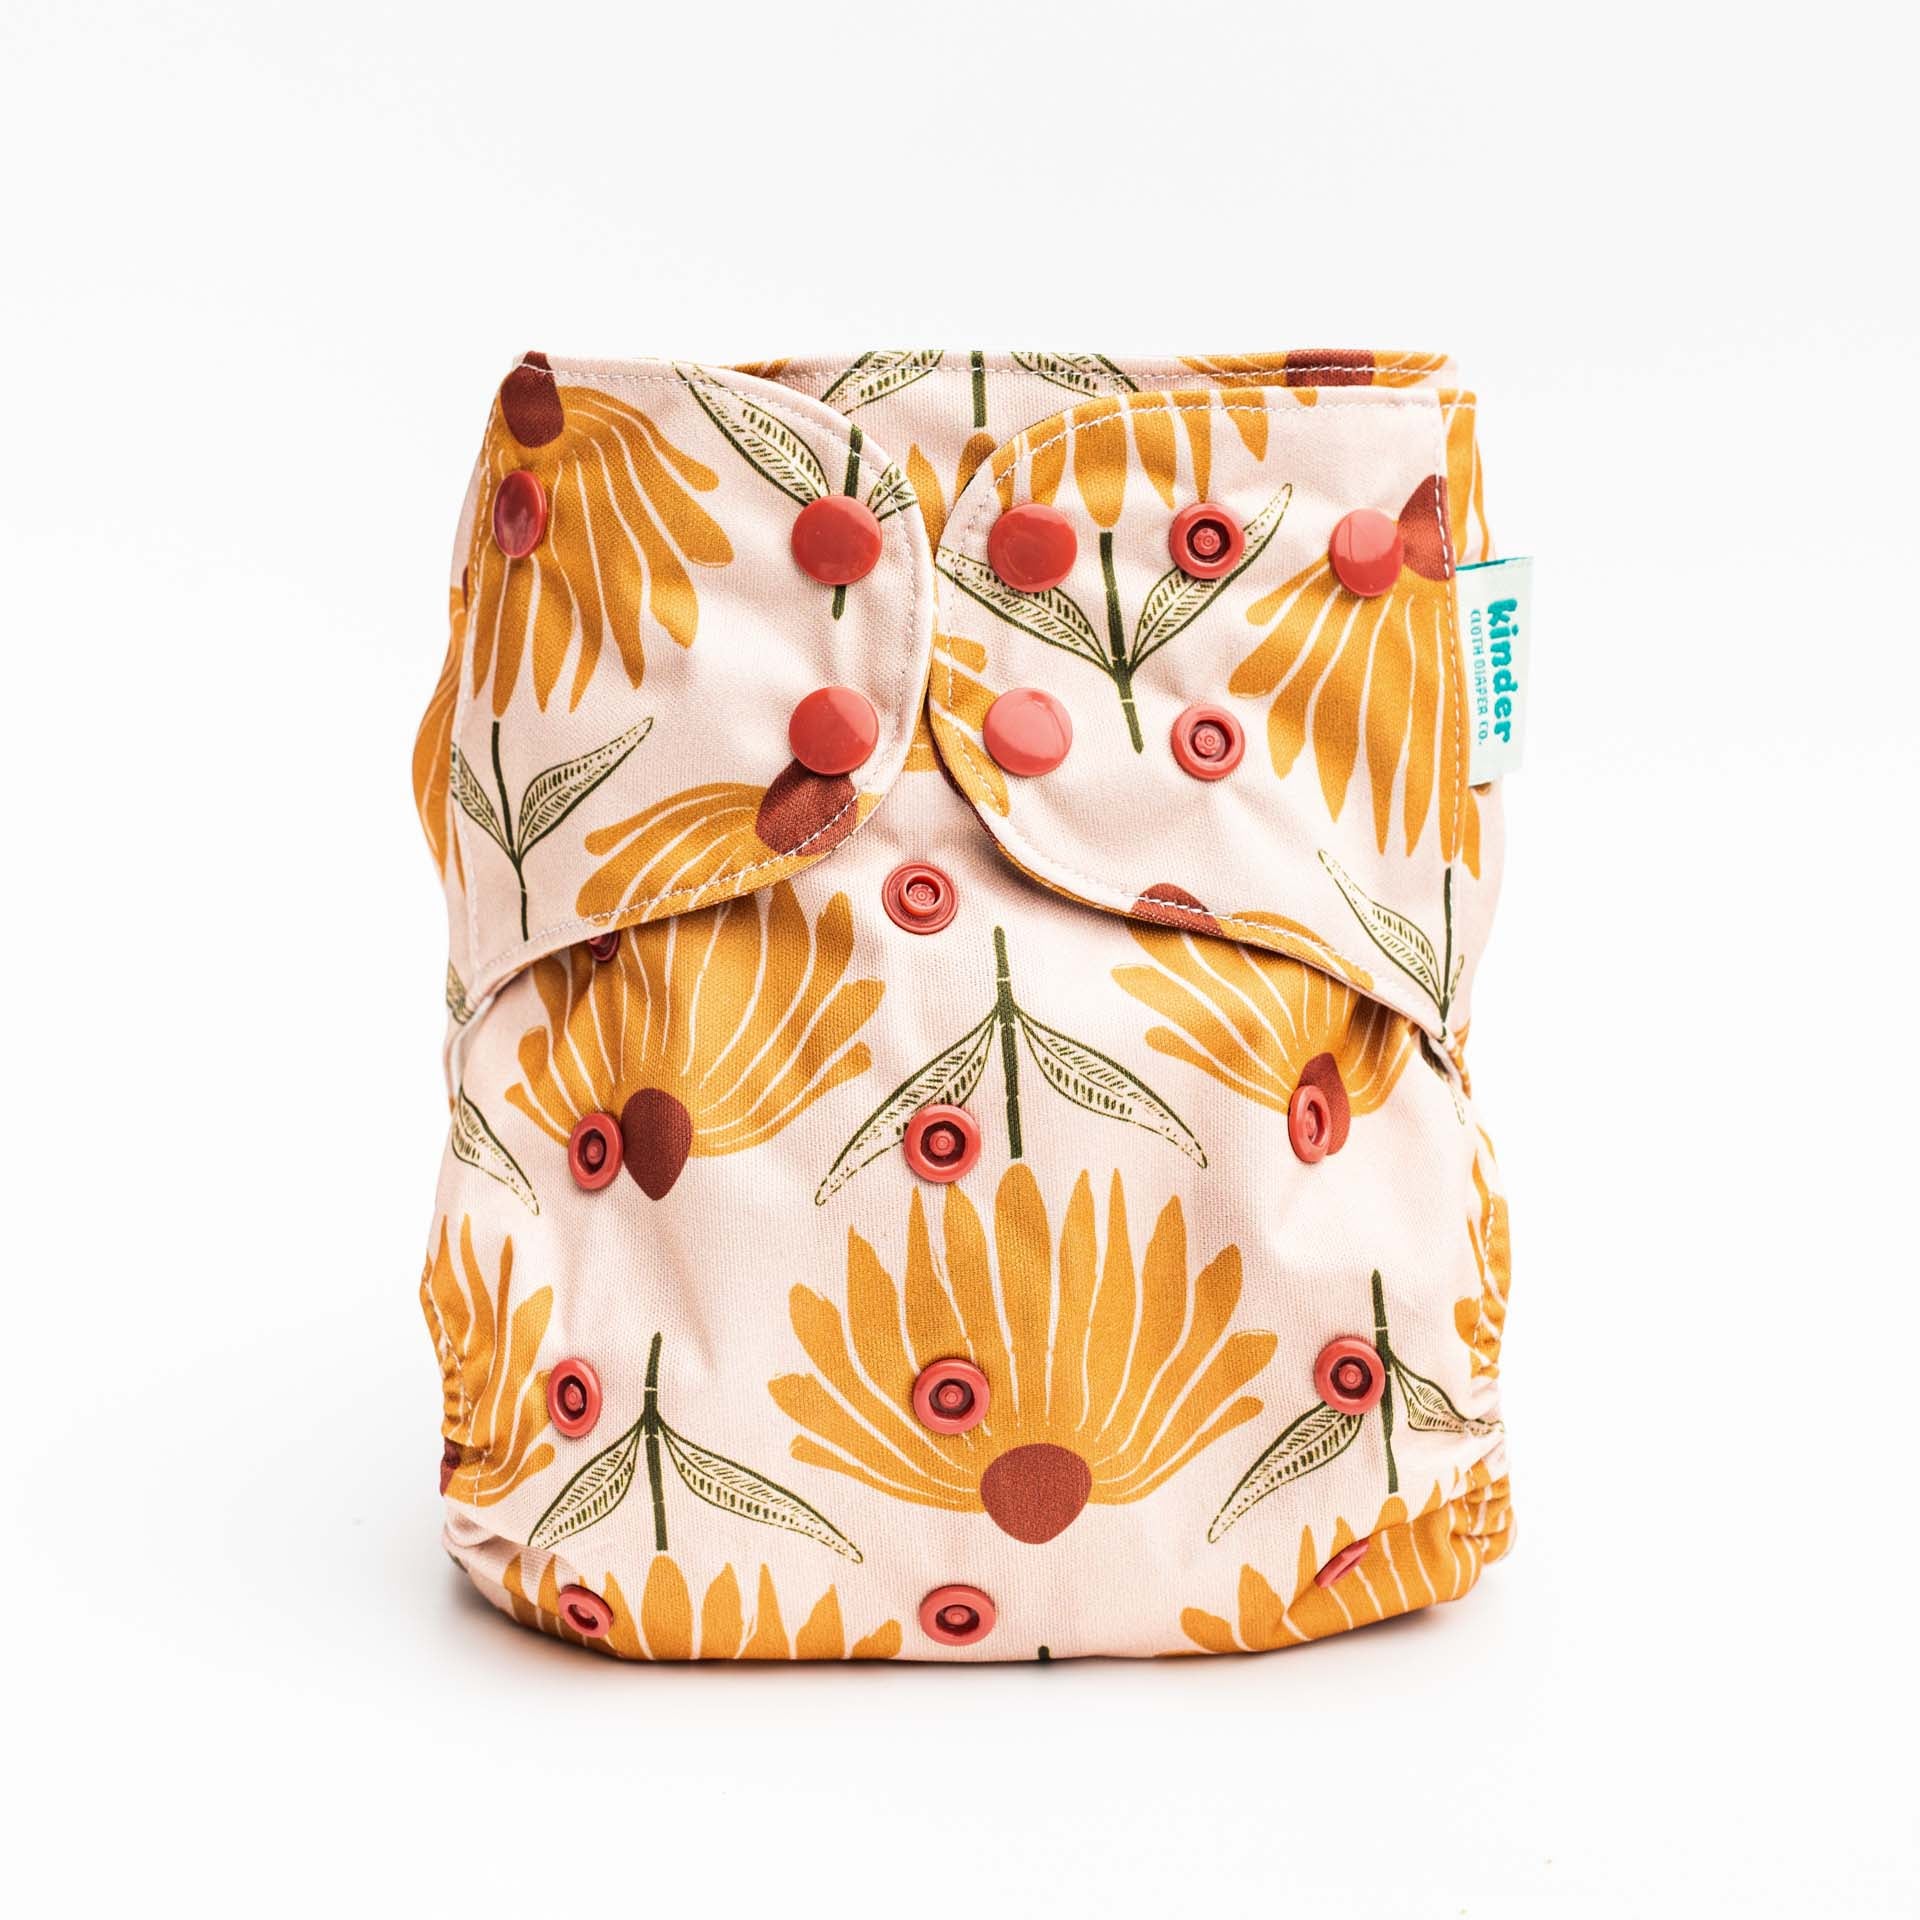 sunflower yellow floral bold pocket diapers fit babies from birth to potty training reusable diapering cloth diapers baby diapers